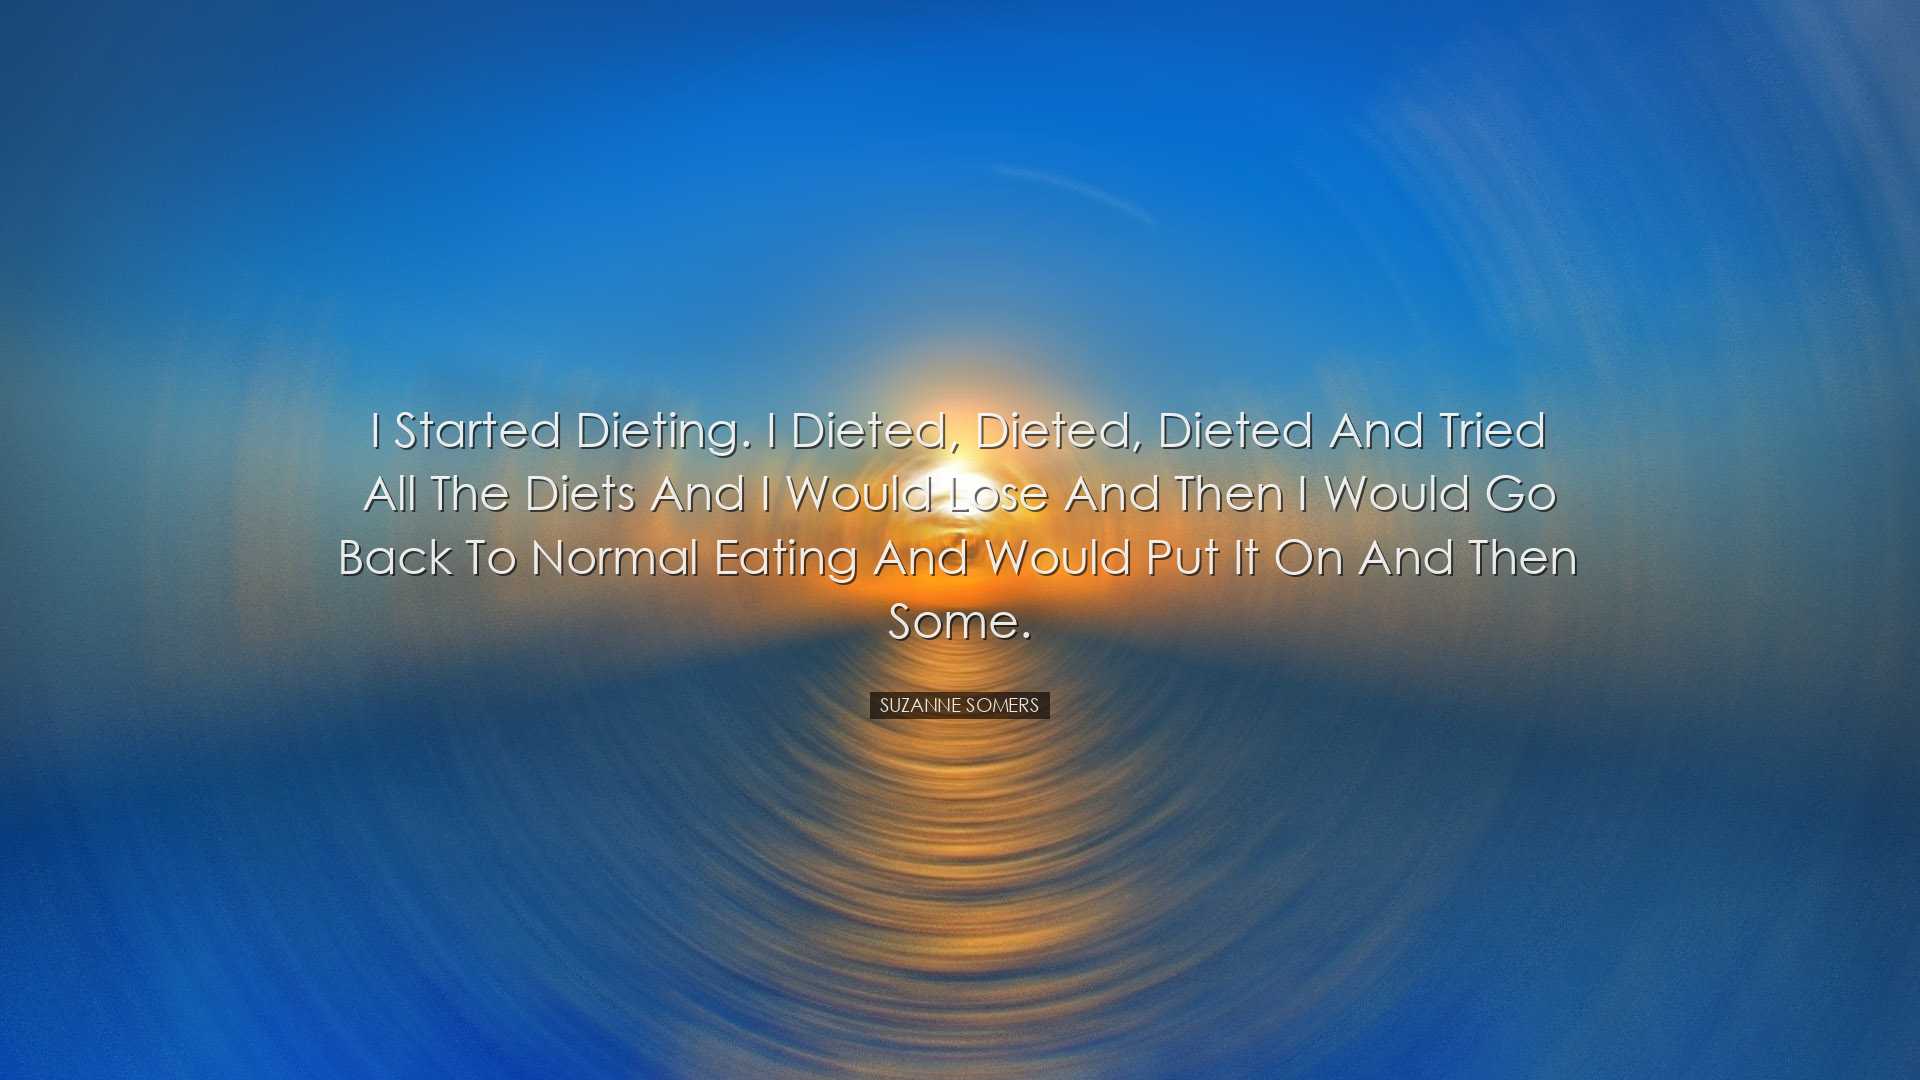 I started dieting. I dieted, dieted, dieted and tried all the diet